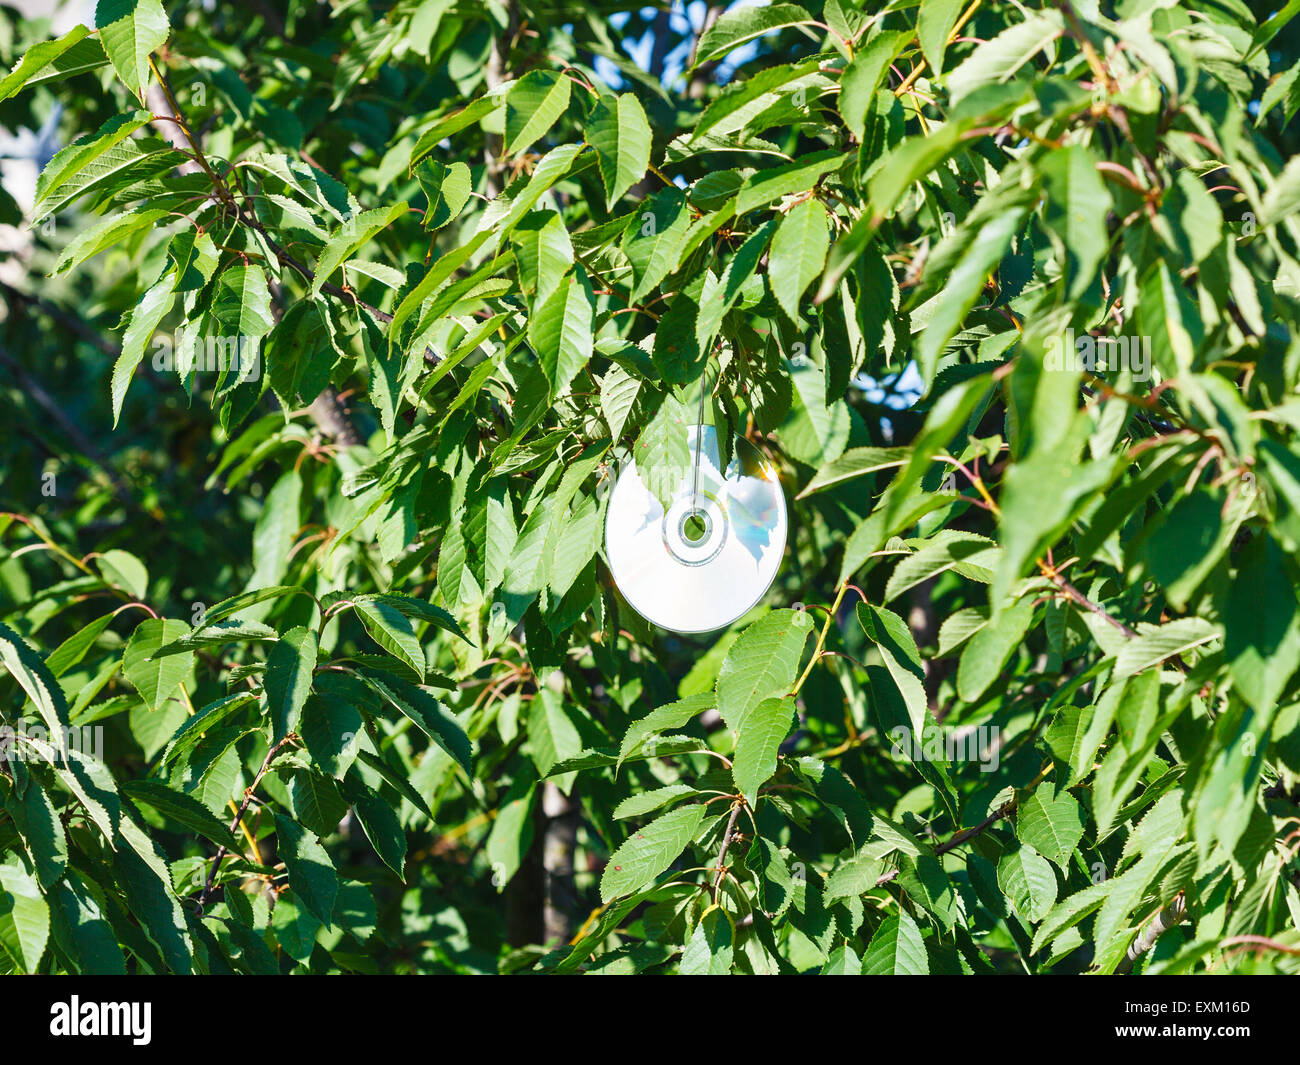 shiny compact disc on black cherry tree to scare birds in sunny summer day Stock Photo